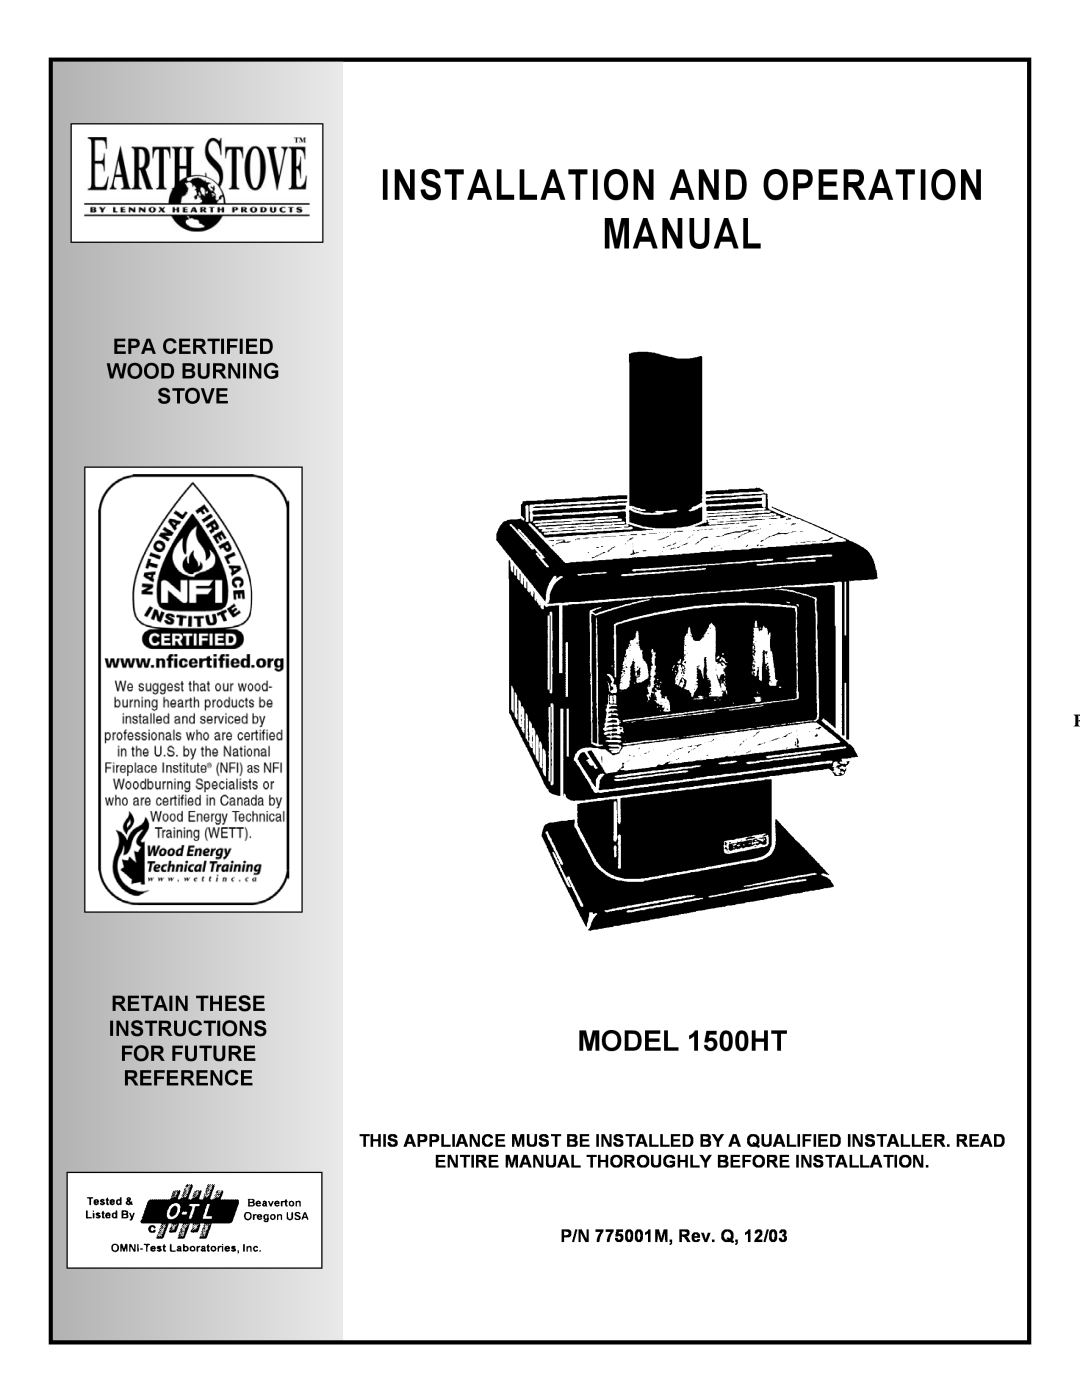 Milwaukee operation manual Entire Manual Thoroughly Before Installation, P/N 775001M, Rev. Q, 12/03, MODEL 1500HT 